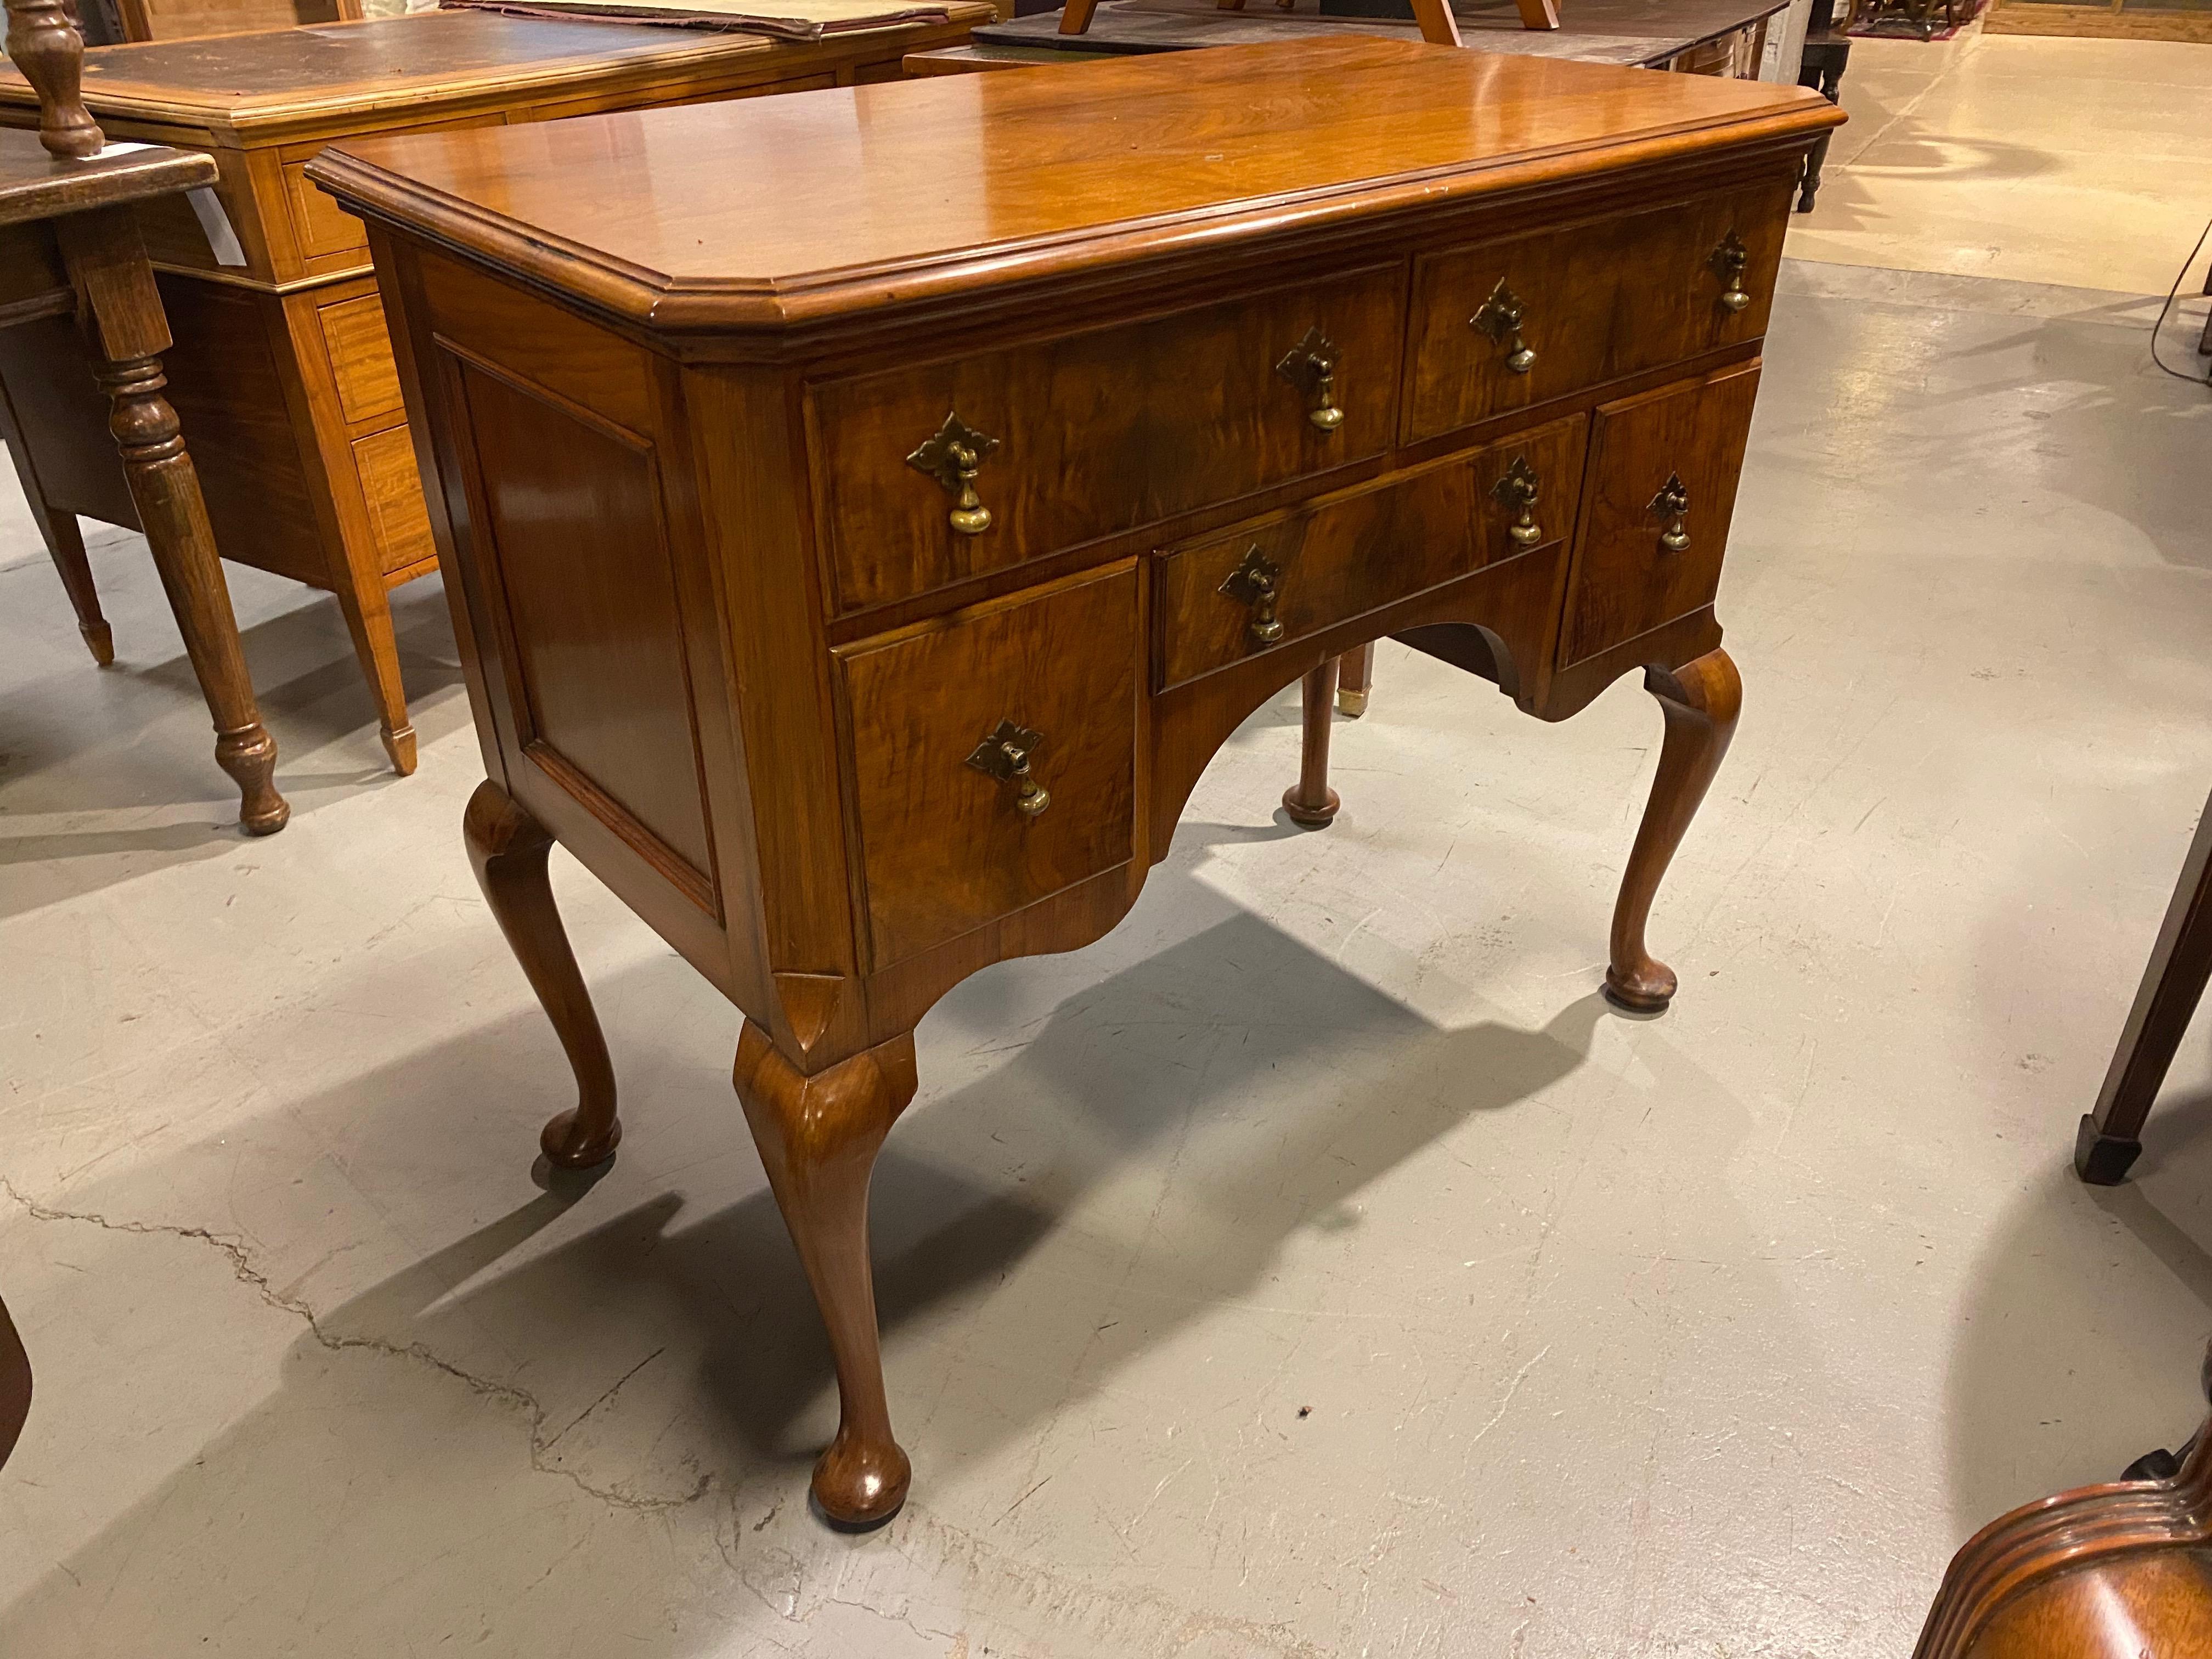 This is a handsome console serving cabinet with 5 drawers, walnut solids with burr walnut drawer faces.
This walnut commode or serving cabinet has 5 drawers, 2 large 3 small with brass drop handles in the period style.
You will notice the Burr